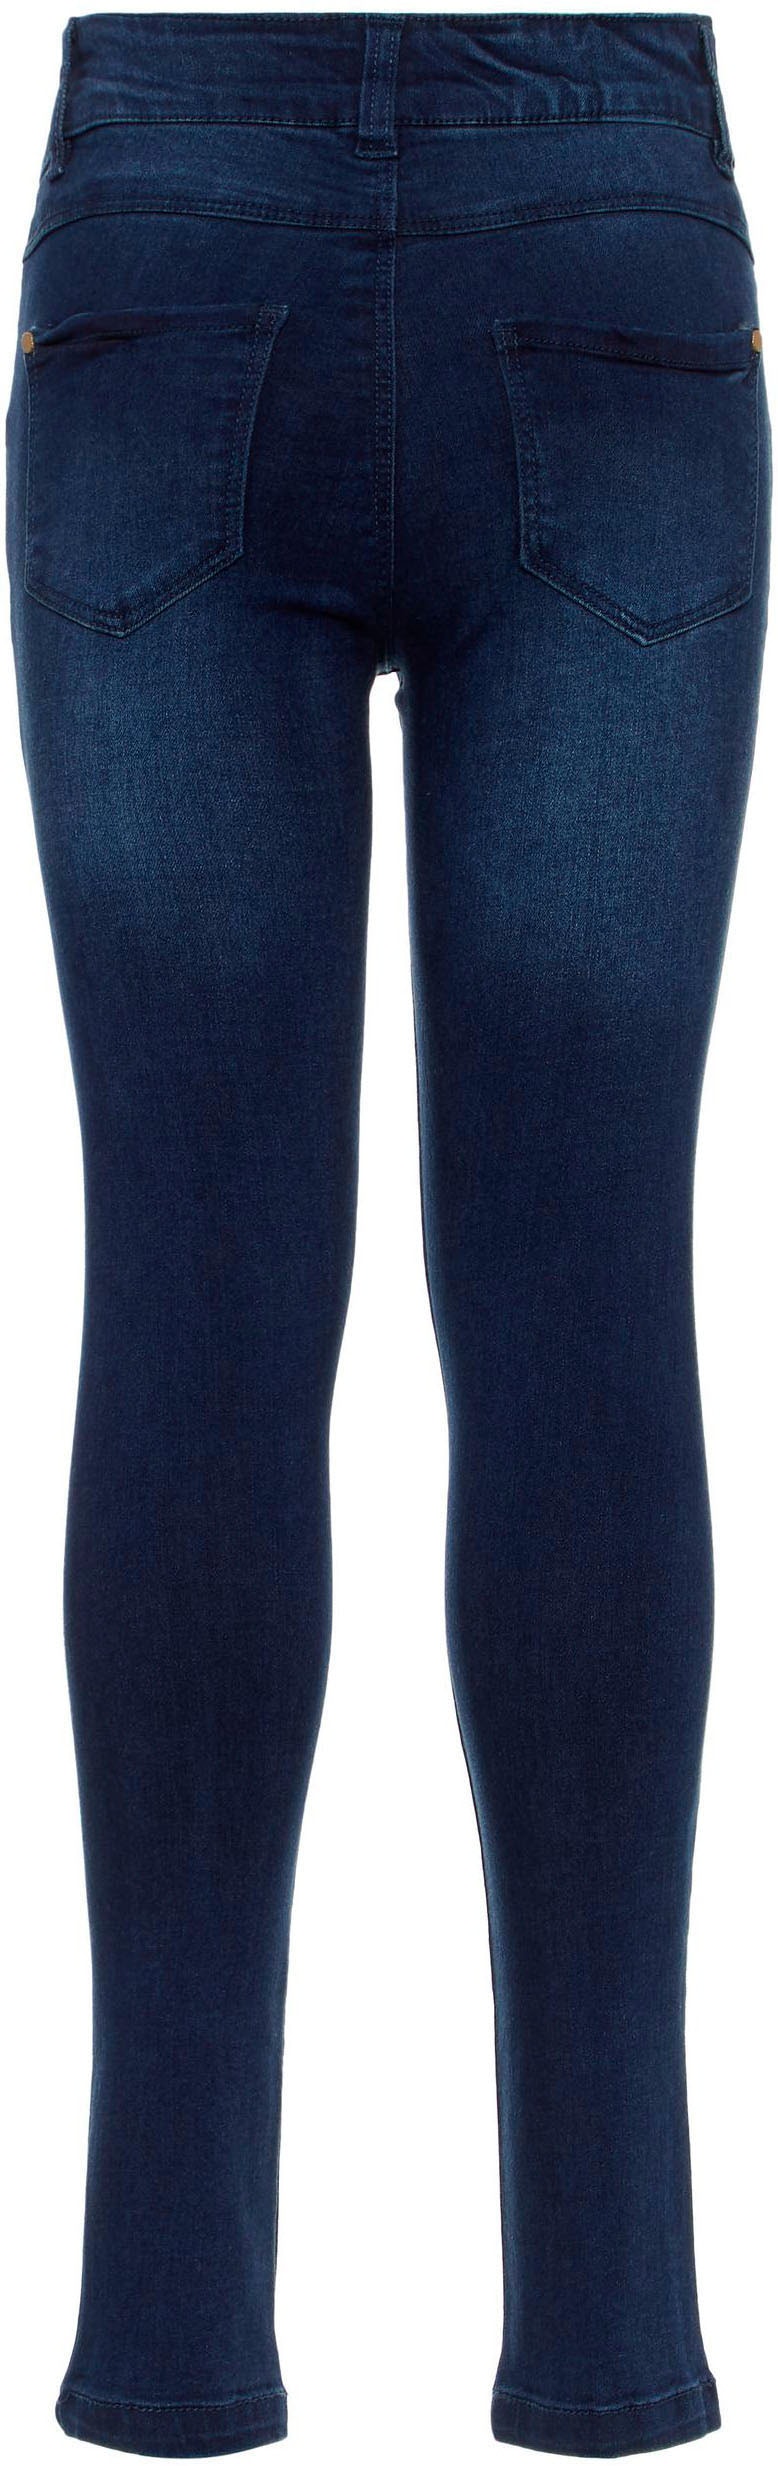 OTTO Online »NKFPOLLY«, Passform Shop schmaler It Name Stretch-Jeans in im